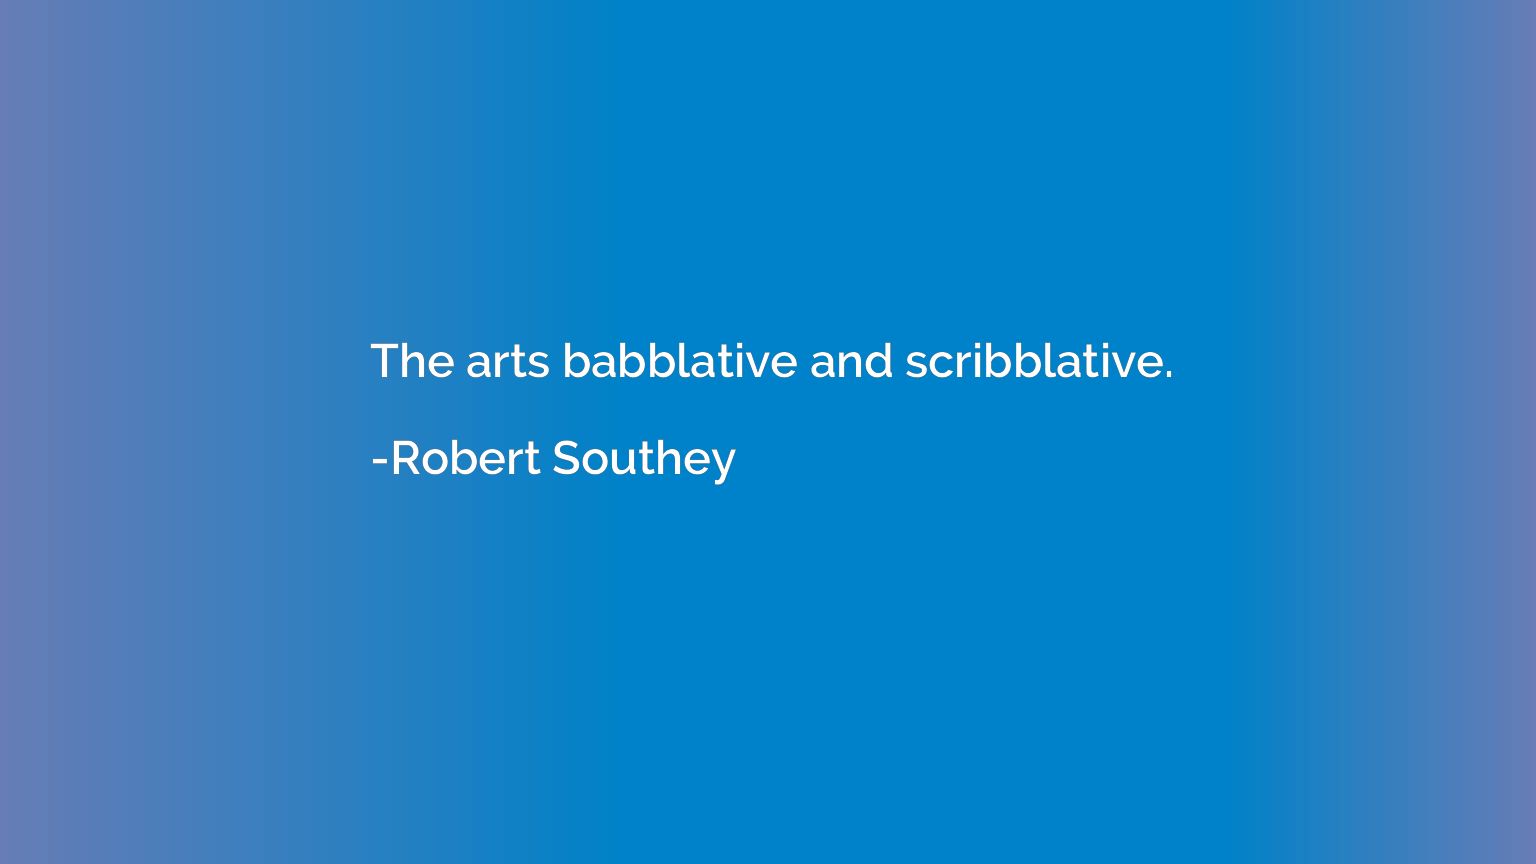 The arts babblative and scribblative.